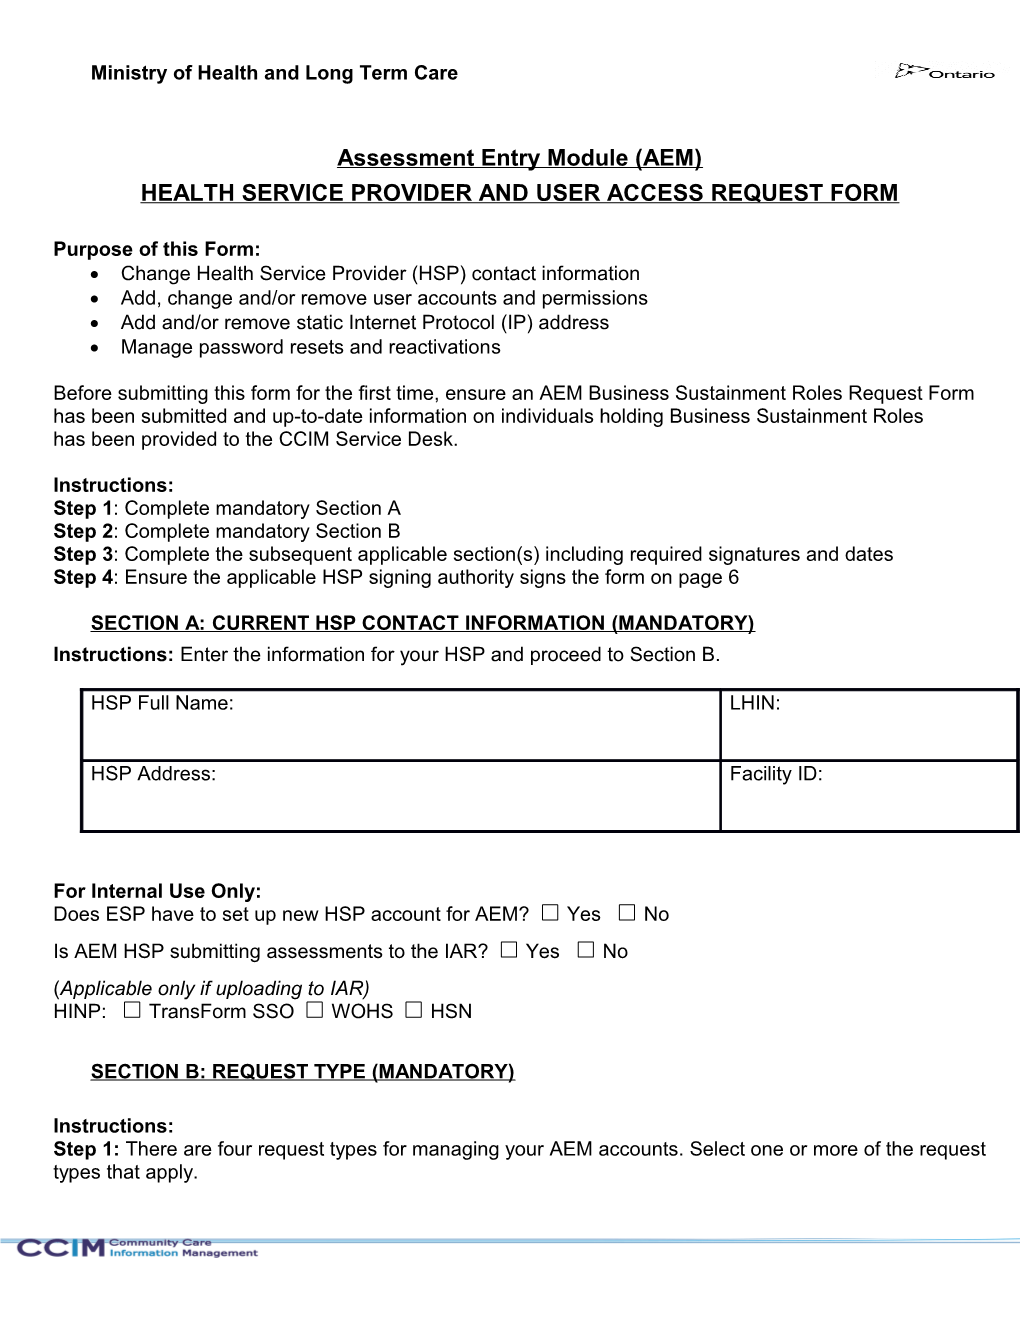 Health Service Provider and User Access Request Form